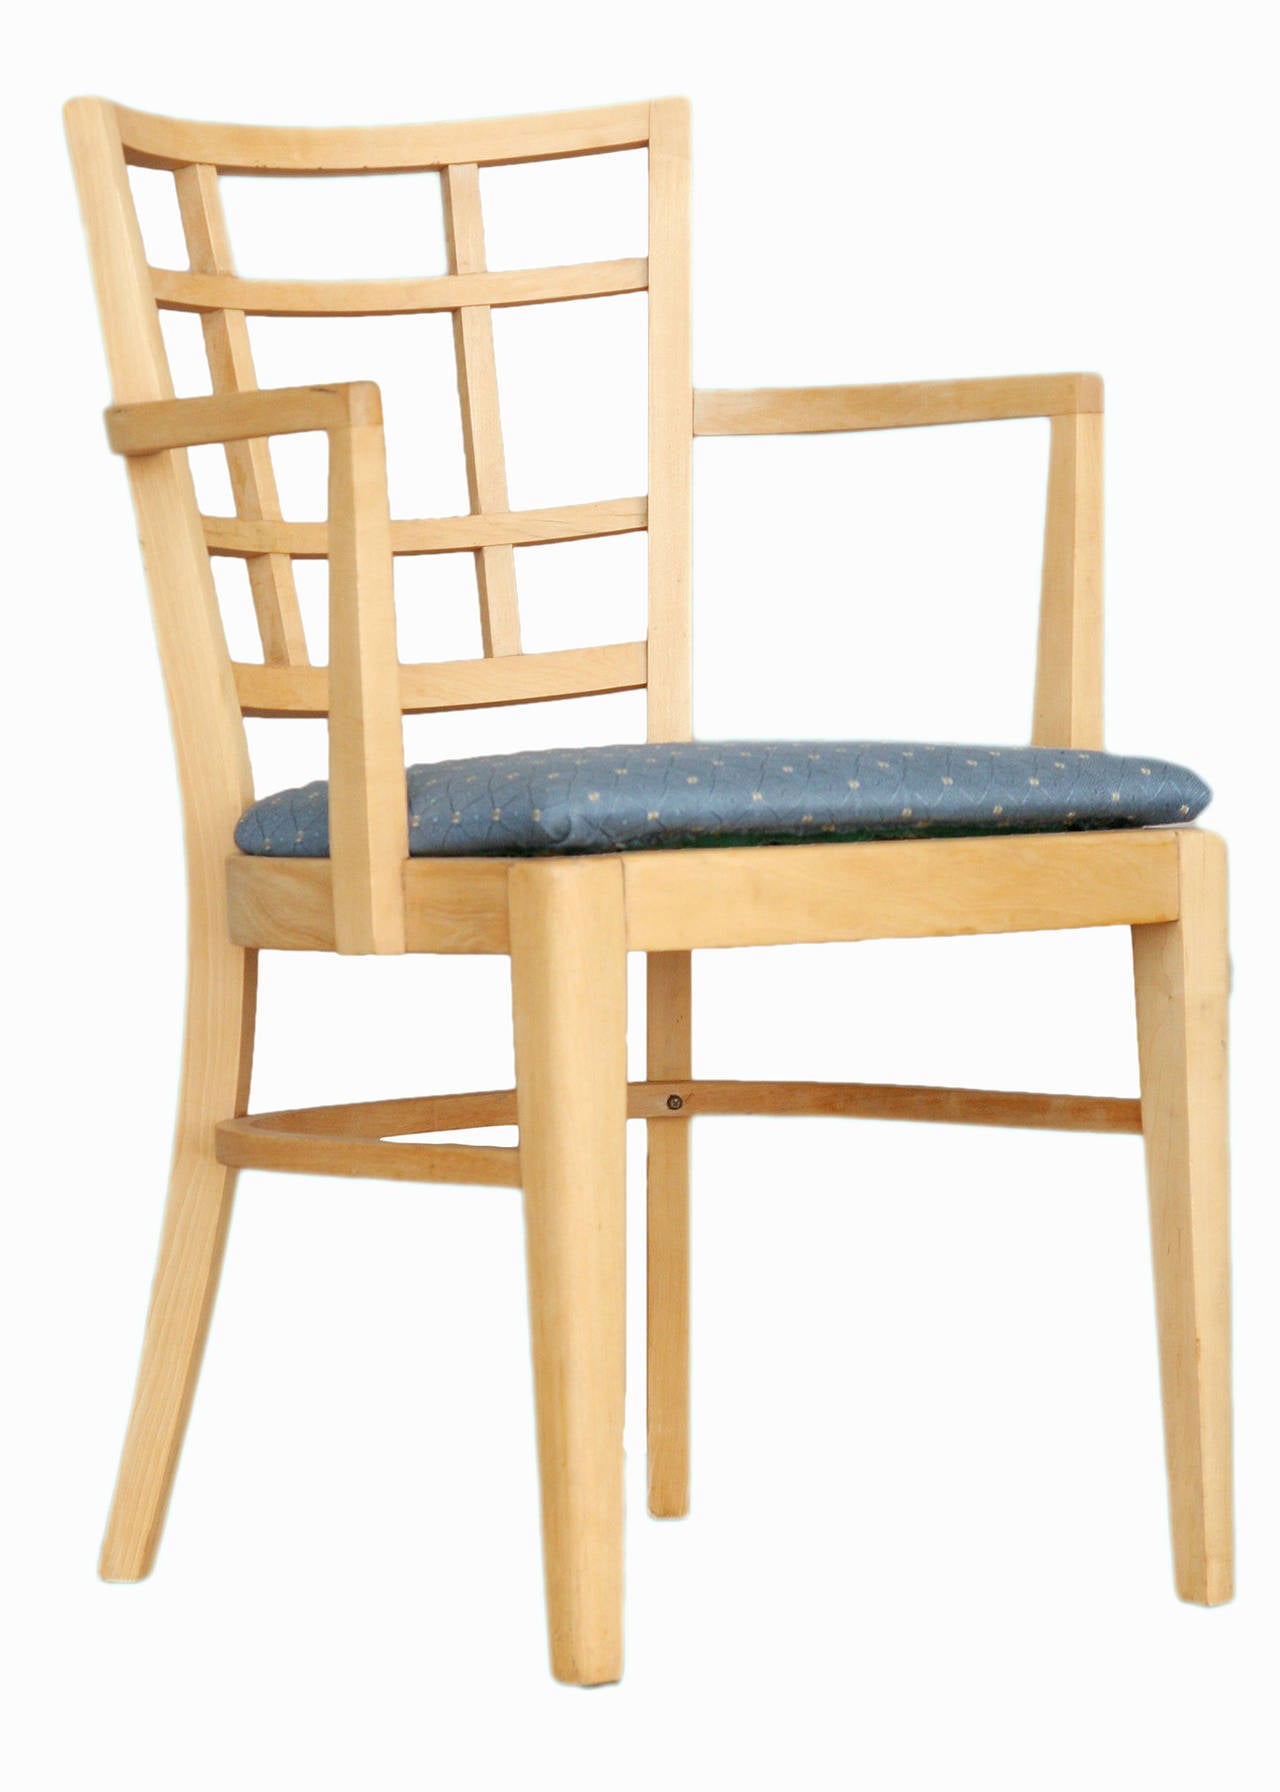 Set of lattice-back dining chairs by Paul Frankl for Brown Saltman group. The chairs upholstered in high-quality blue cotton fabric. The set includes seven captain's chairs.

North America, circa 1940.